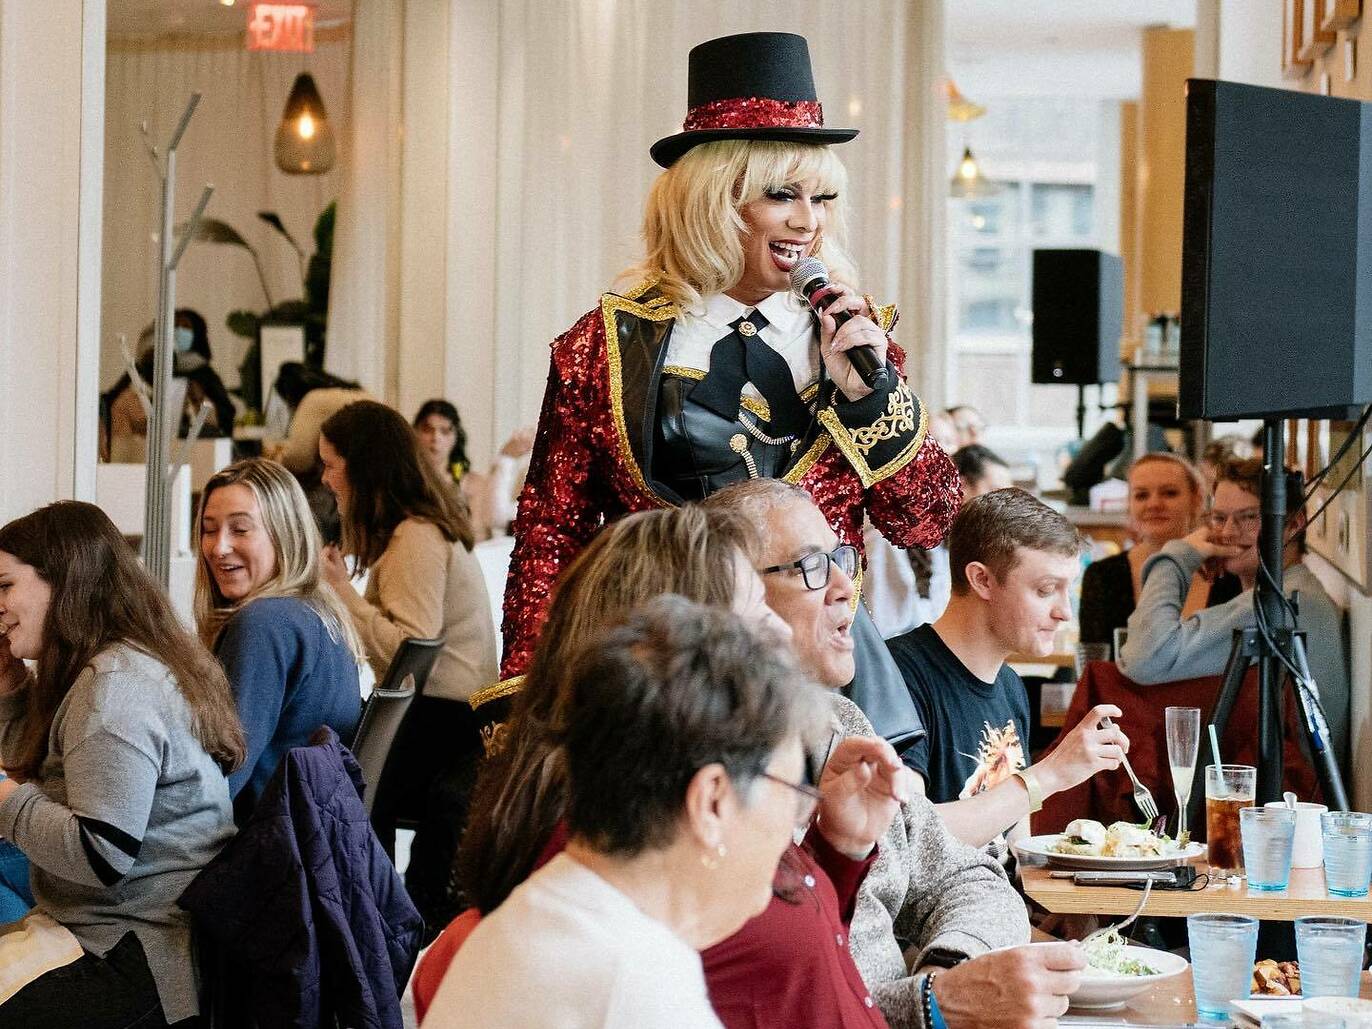 NYC's best drag brunches